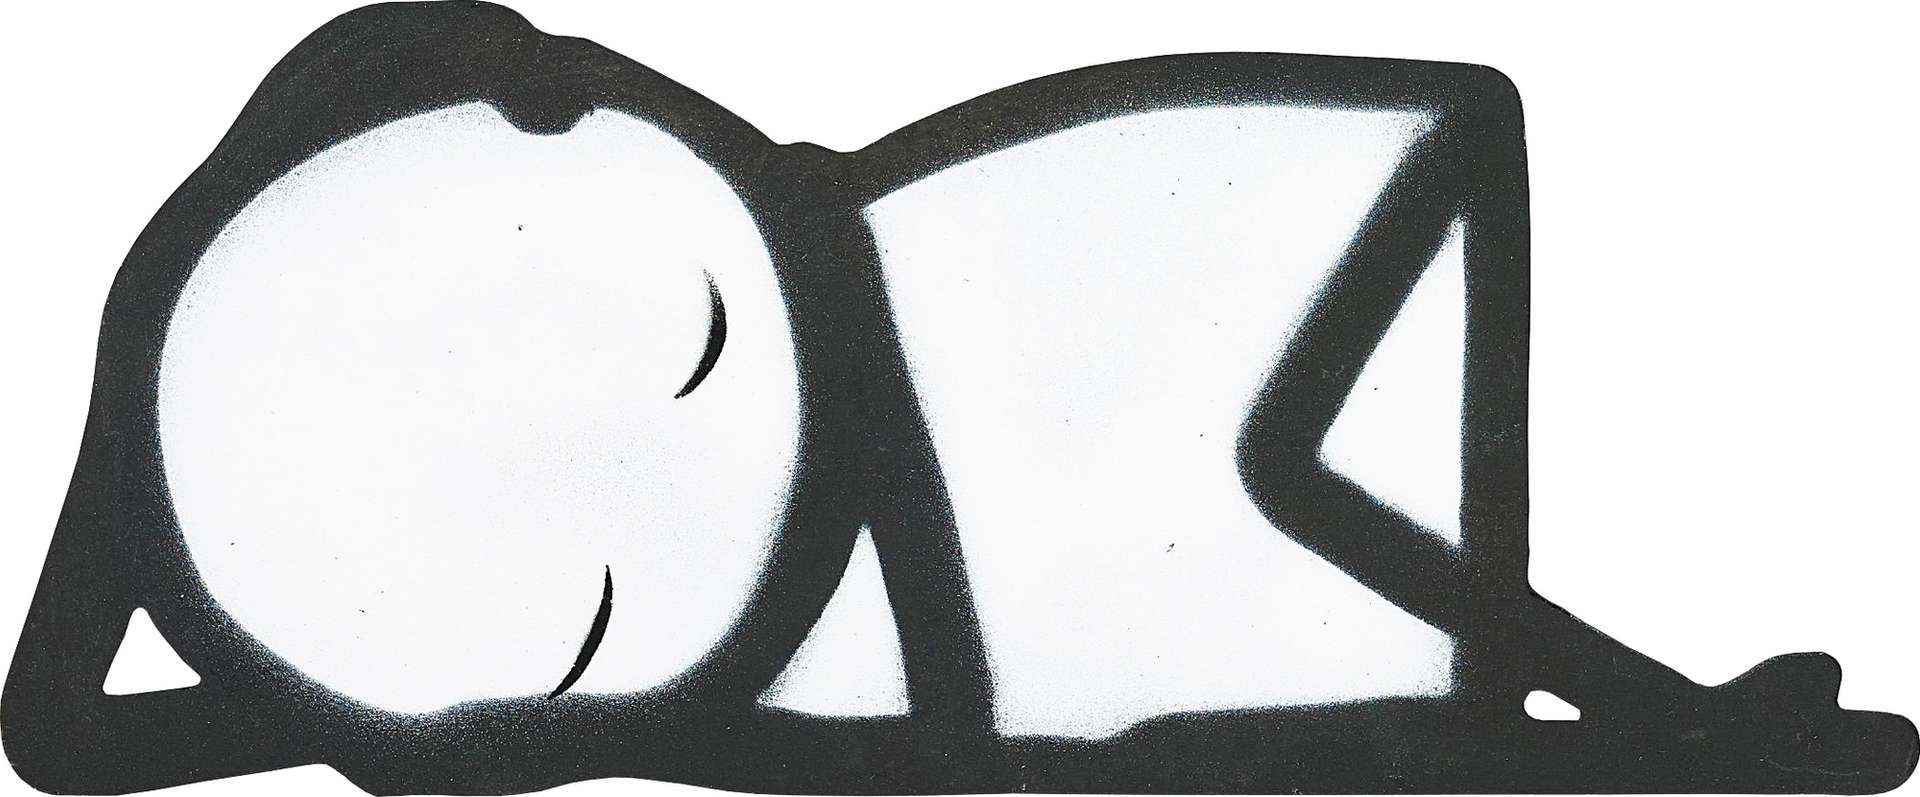 STIK’s Rough Sleeper. A spray painted artwork of a black outlined stick figure with a white body posed sleeping on their side against a white background.